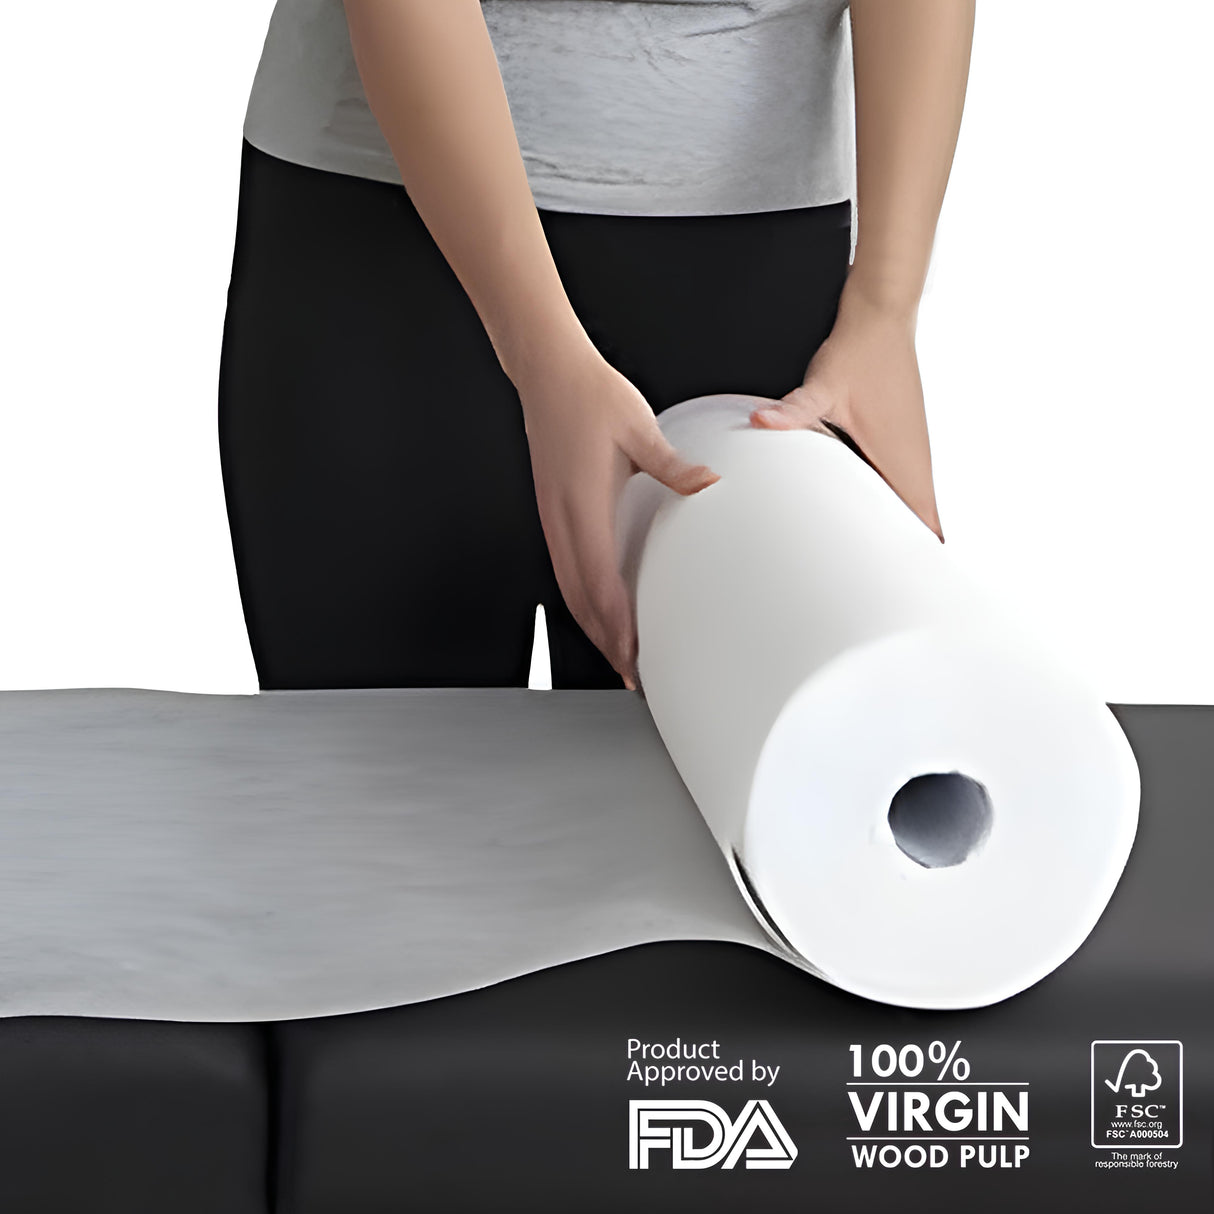 Box of 18" x 250 Ft Premium Smooth Paper Roll for Massage Table (8 Rolls/Box)